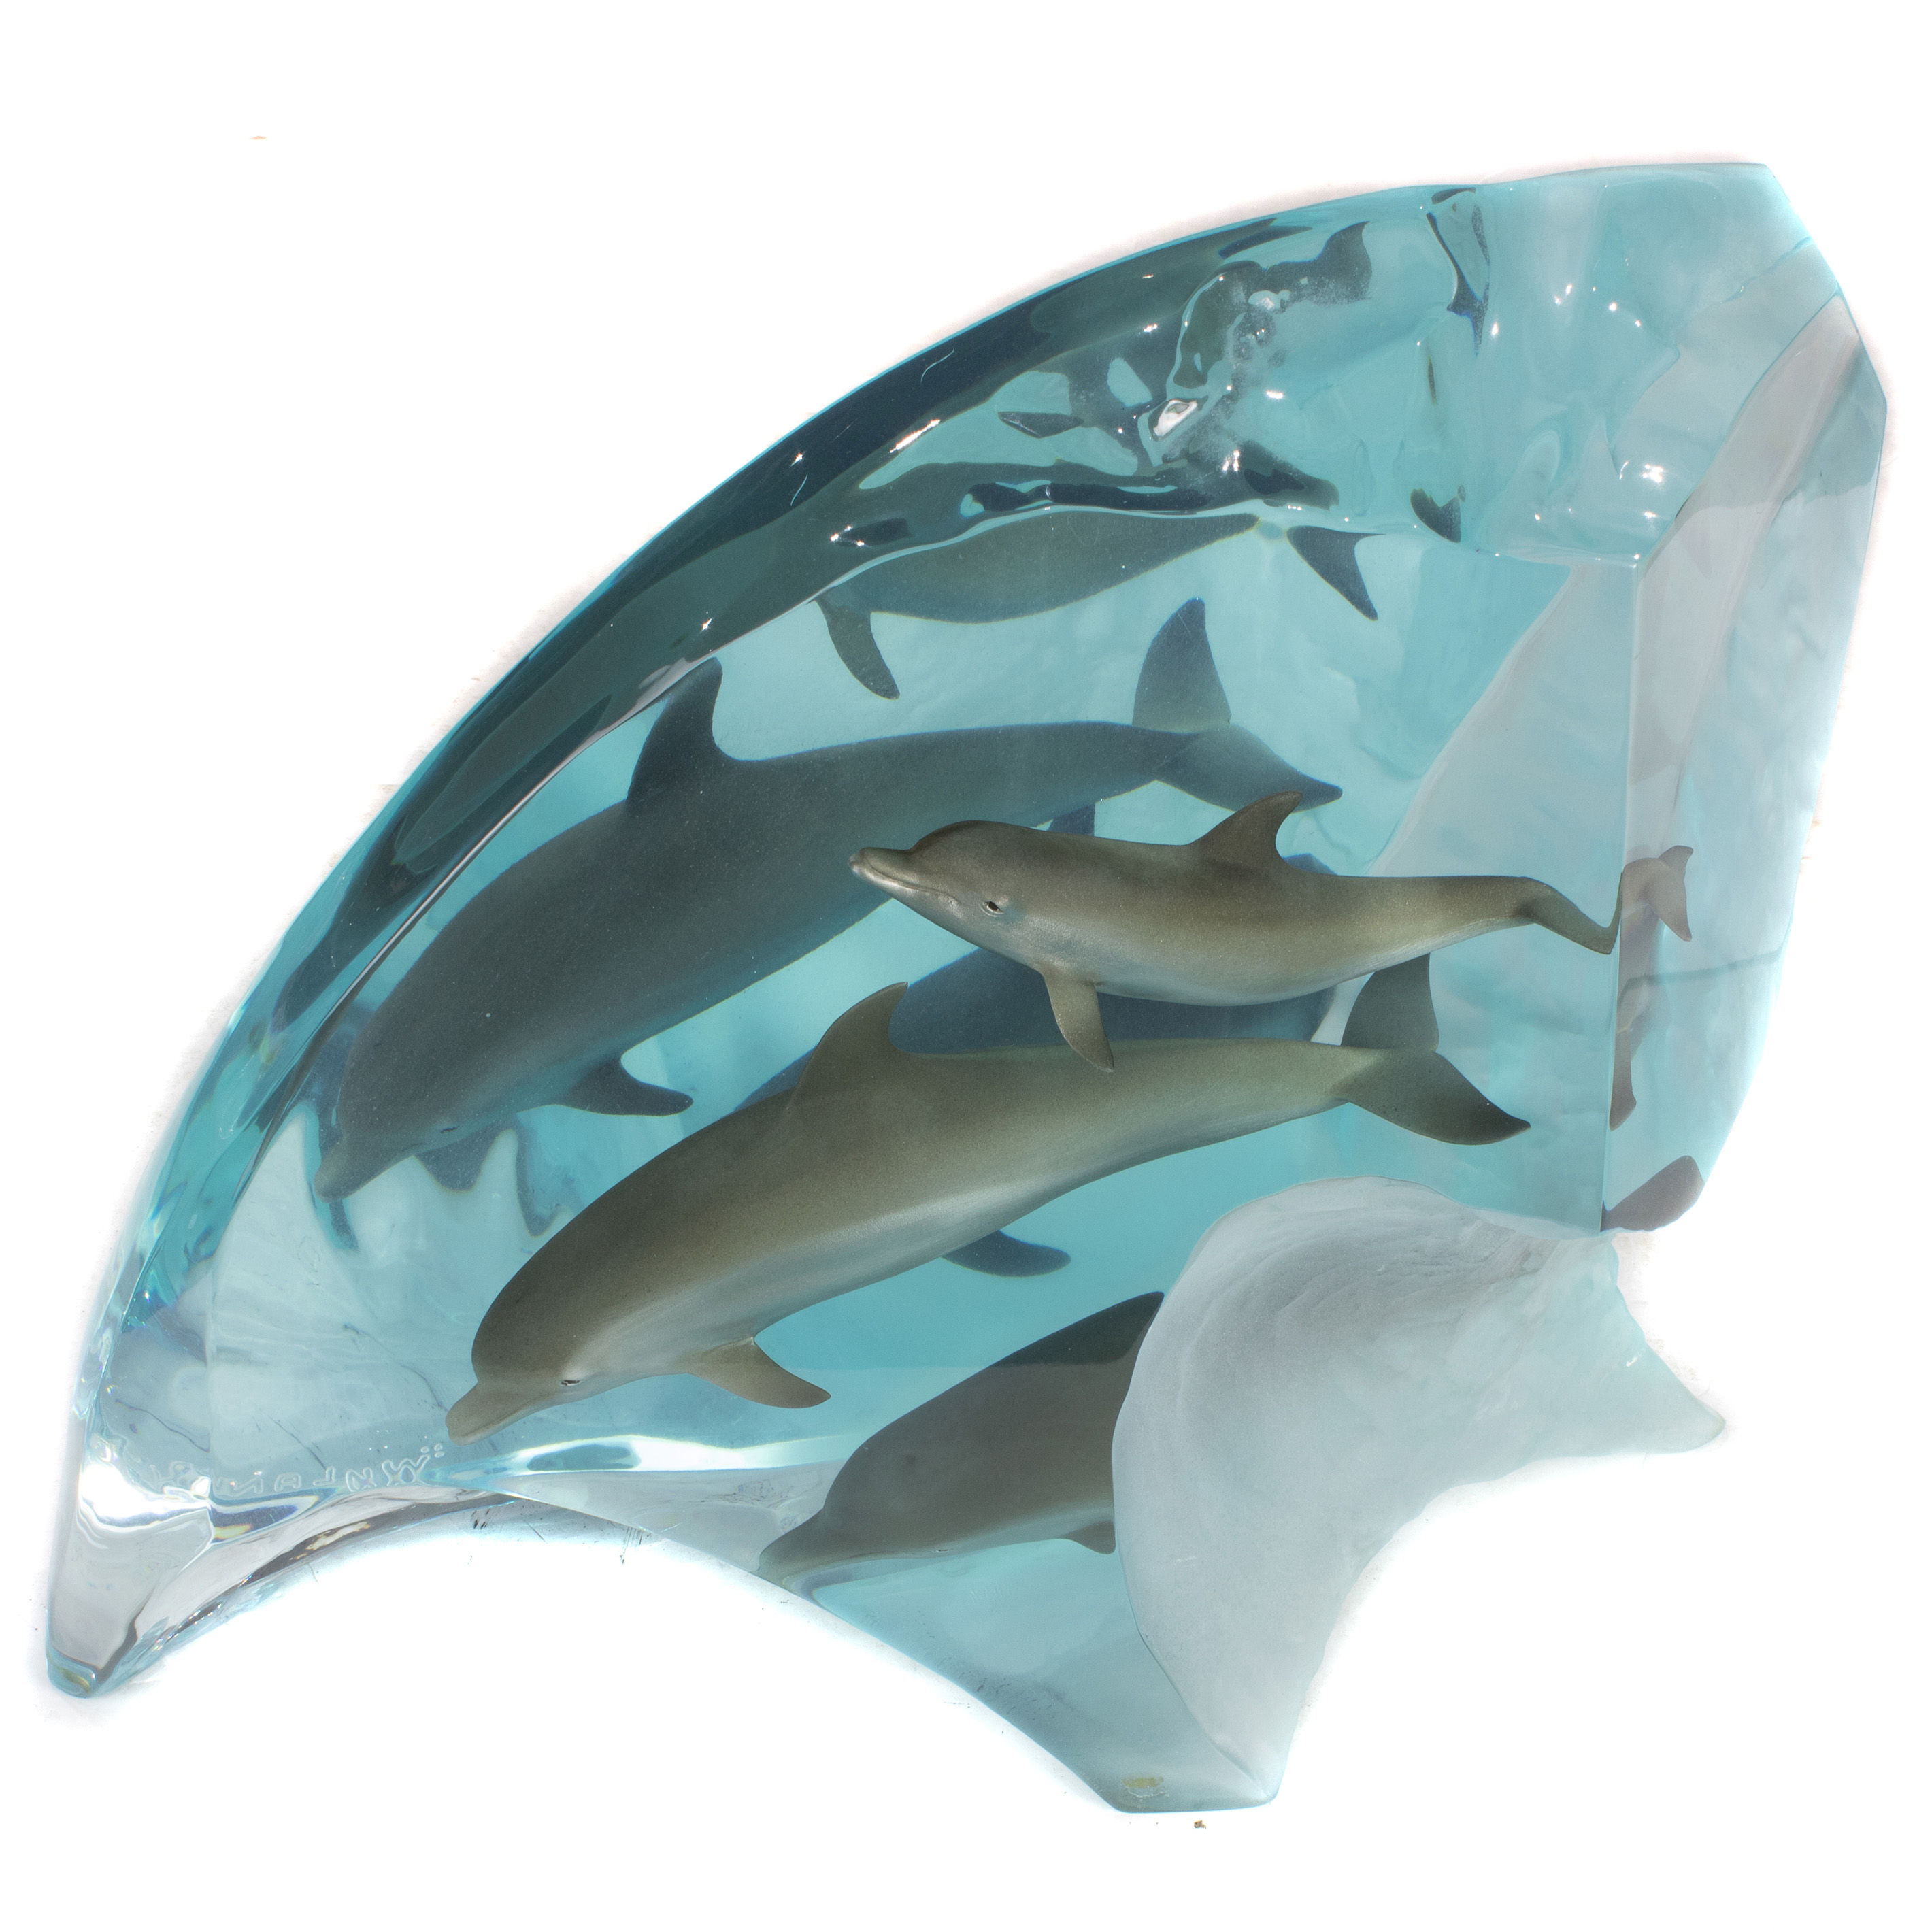 WYLAND ACRYLIC SCULPTURE OF DOLPHINS 3a43b3